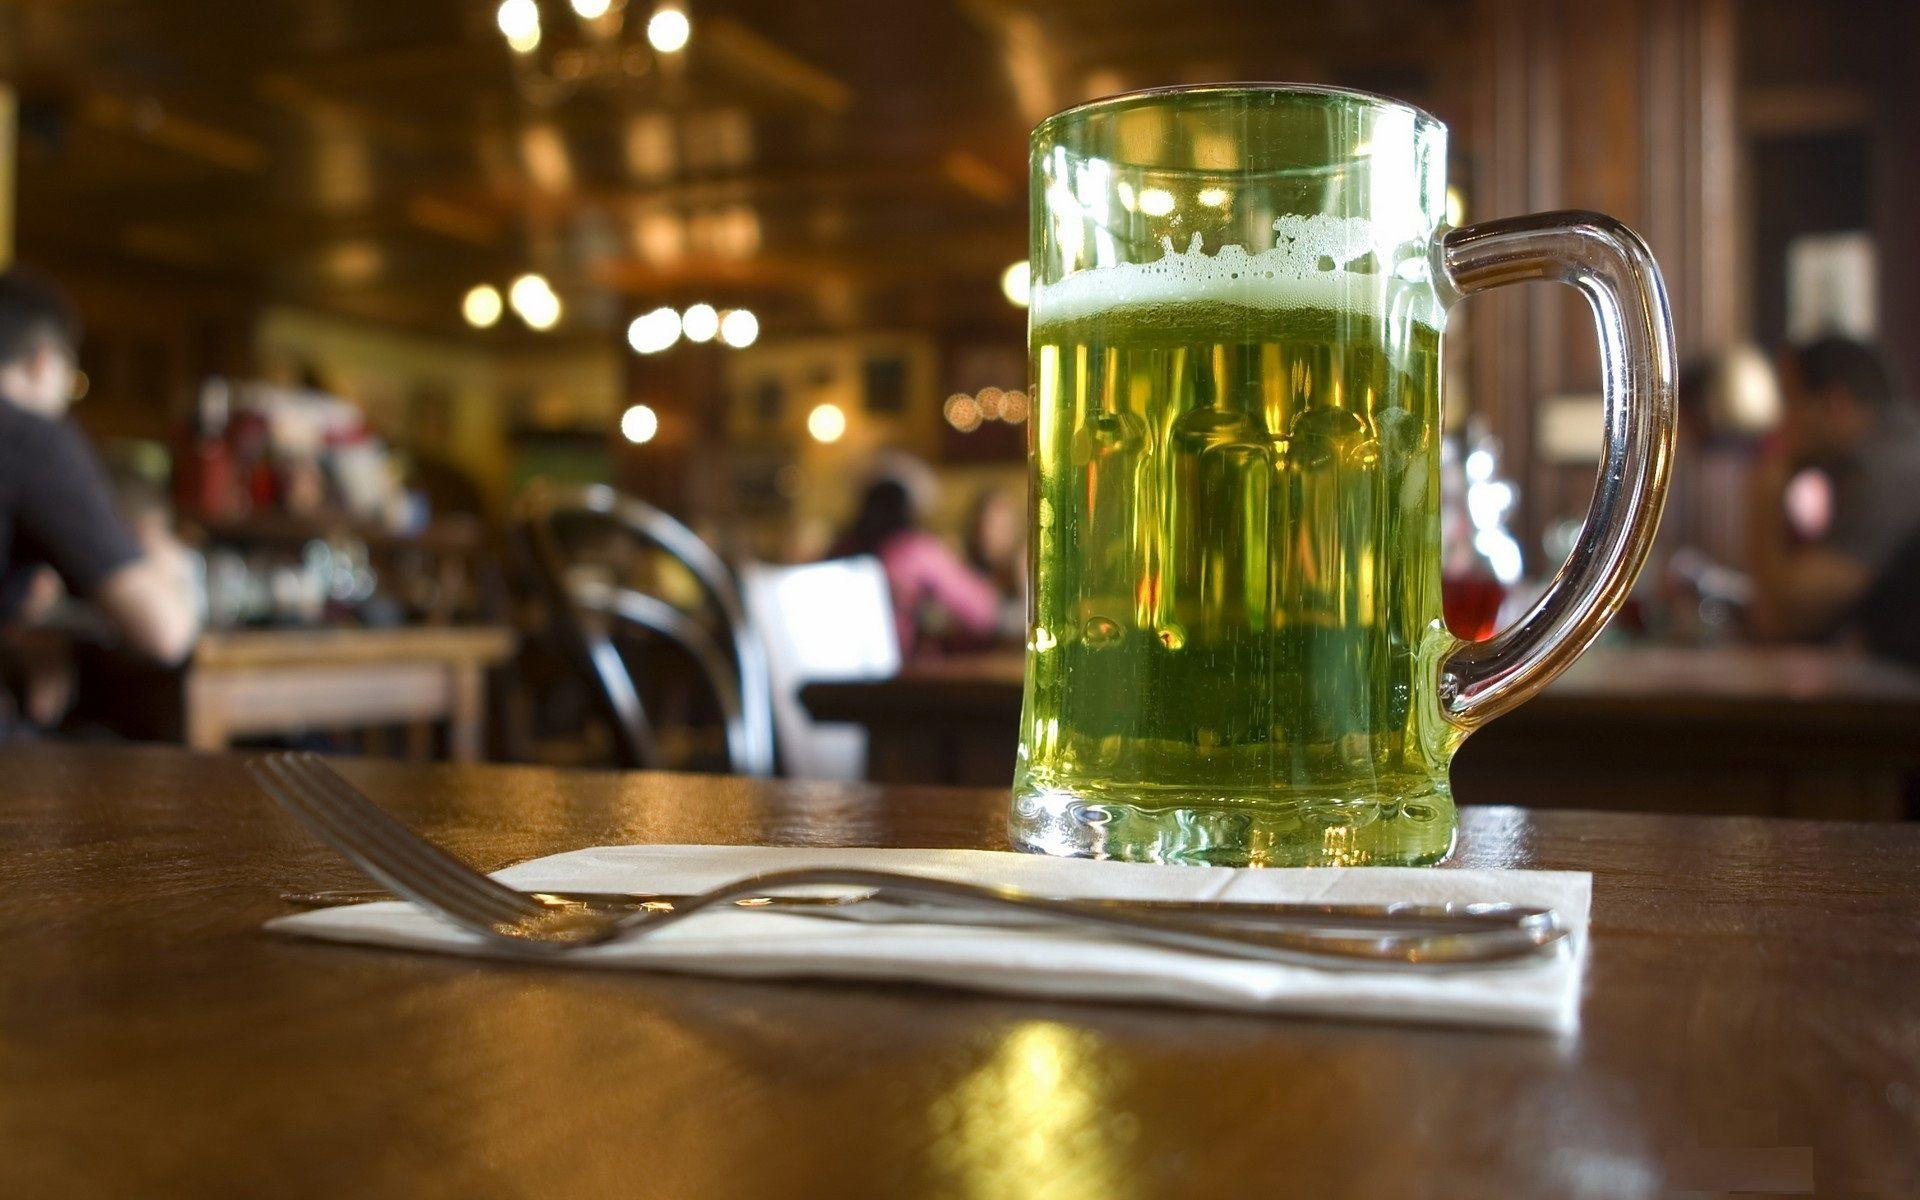 places to celebrate St. Patrick's Day in Toronto